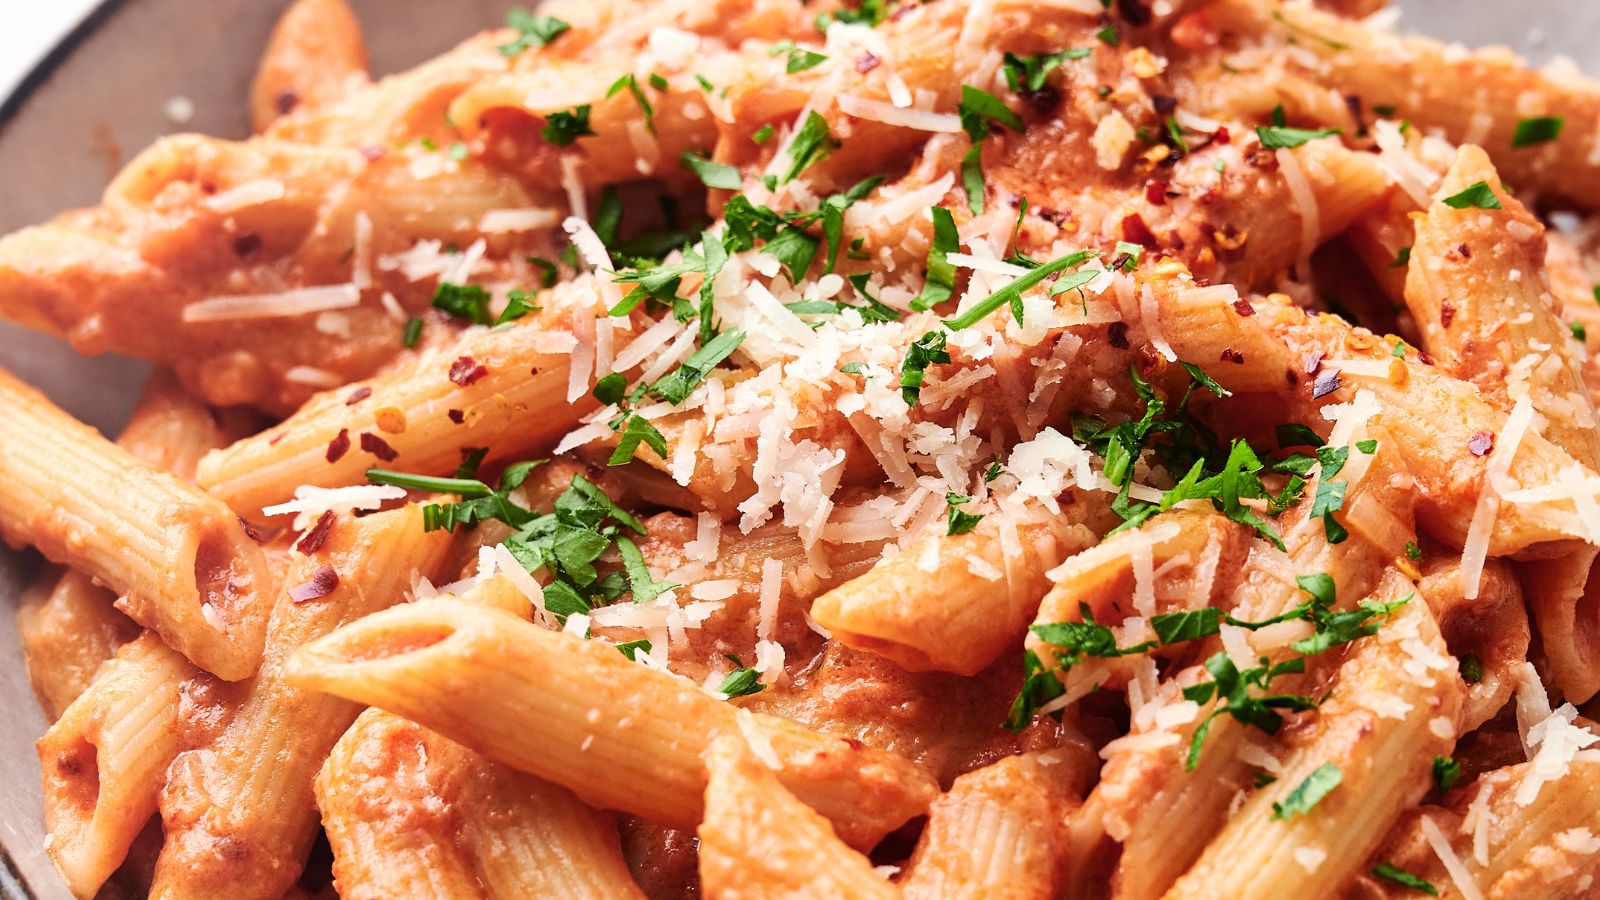 <p>If you’re looking for a restaurant-quality meal that’s easy to make, Penne Alla    Vodka   won’t disappoint. It’s surprisingly fast to prepare, bringing a rich and creamy experience to your table in minutes. This pasta dish is sure to impress anyone with its robust flavors. A perfect pick for a last-minute gourmet meal.<br><strong>Get the Recipe: </strong><a href="https://www.splashoftaste.com/penne-alla-vodka/?utm_source=msn&utm_medium=page&utm_campaign=">Penne Alla Vodka</a></p>